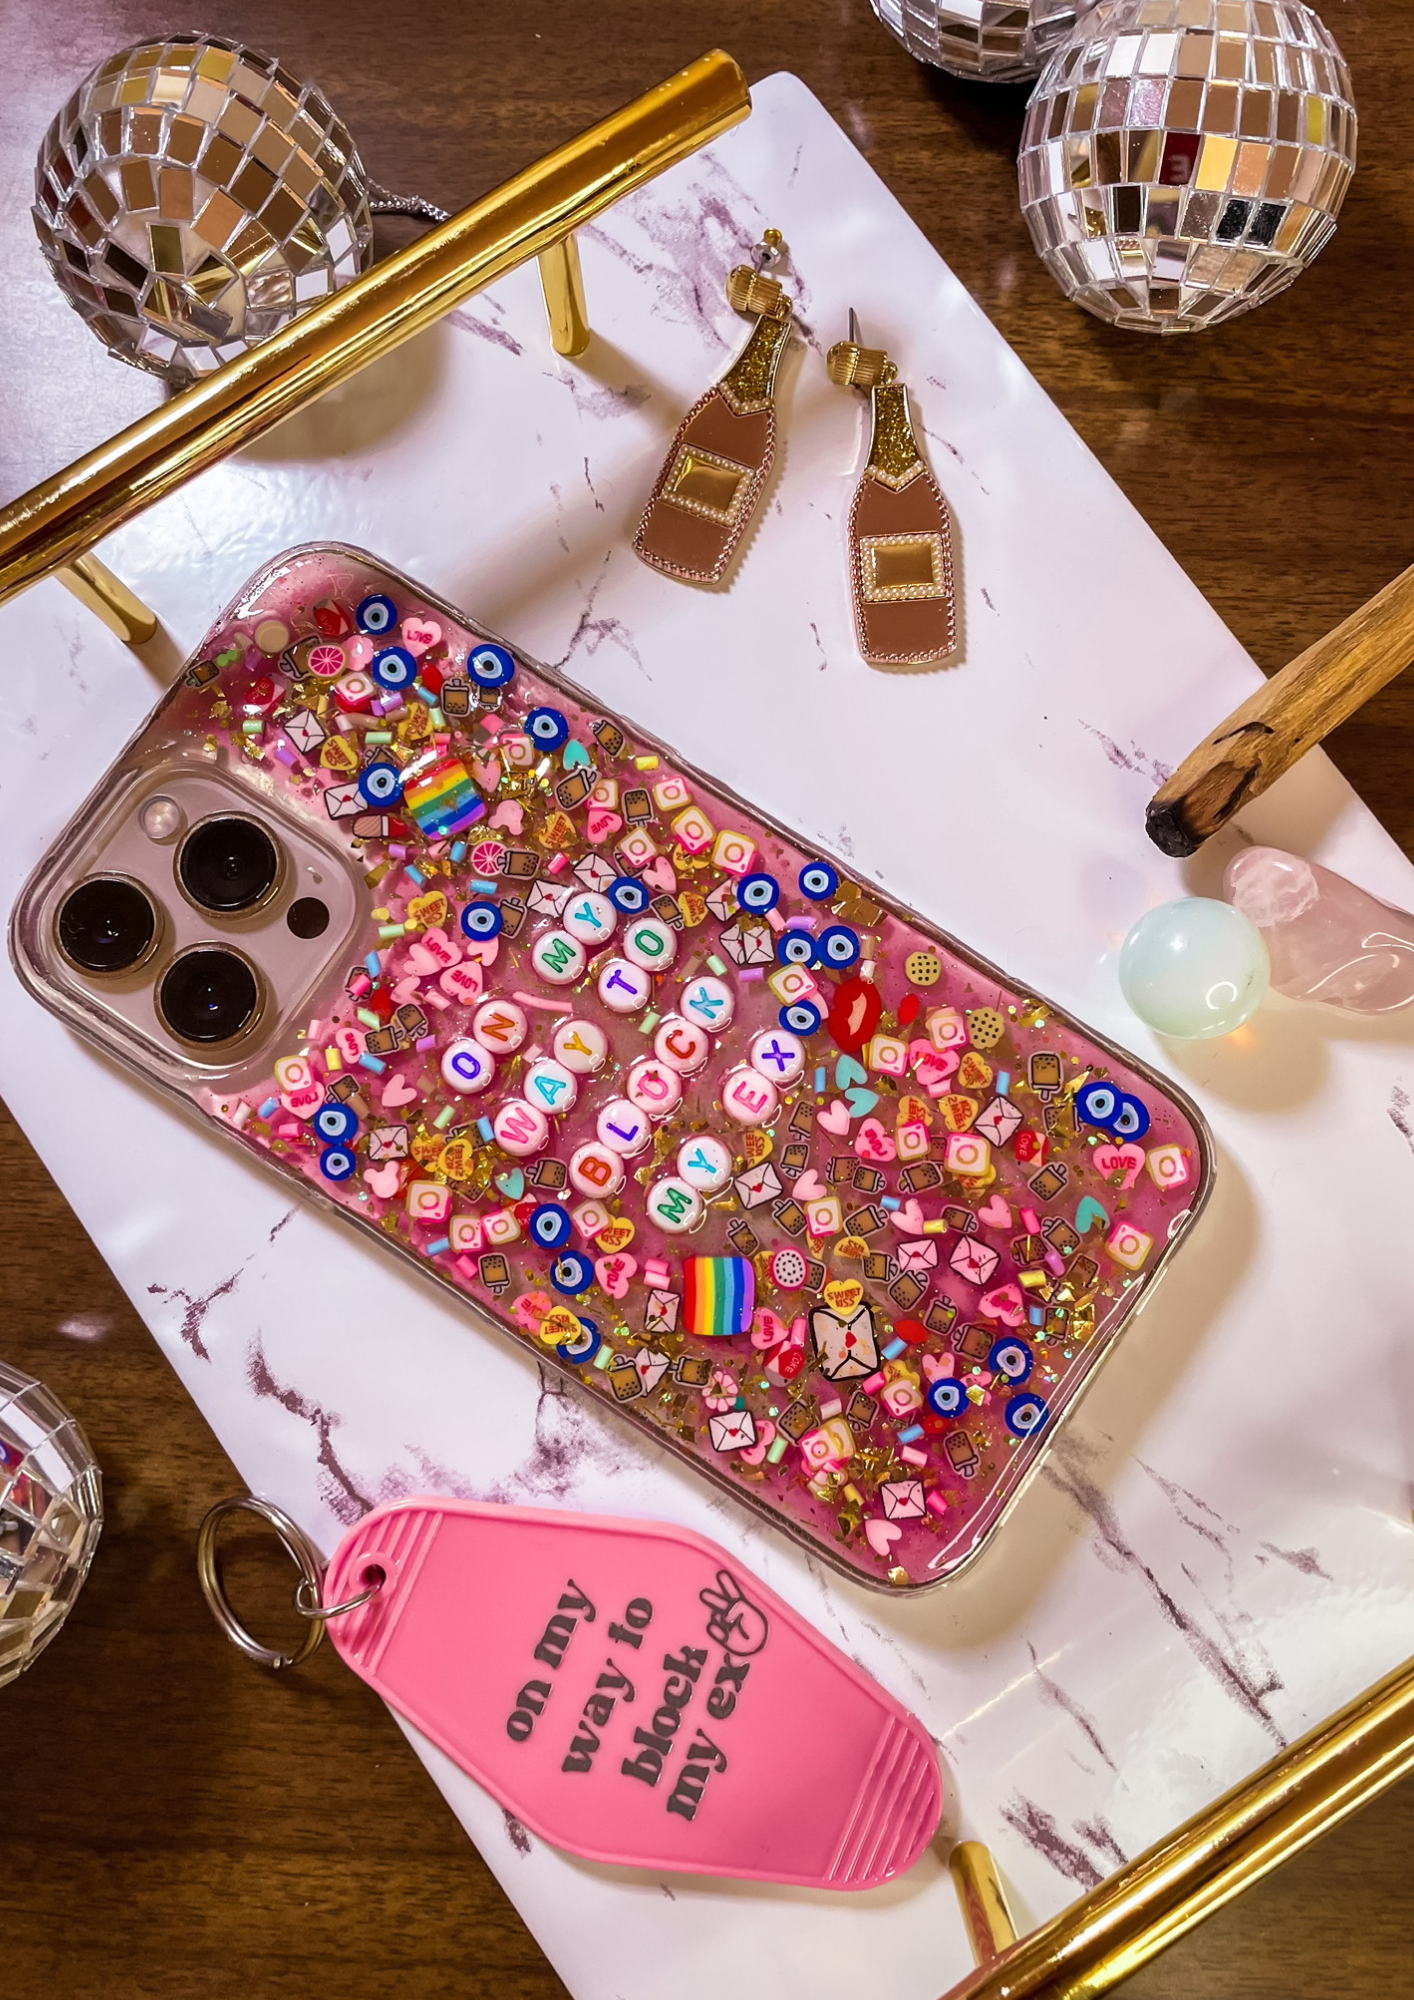 an iPhone case laid flat, decorated with emoji inserts and bracelet beads that read "on my way to block my ex", on a tray surrounded by disco balls